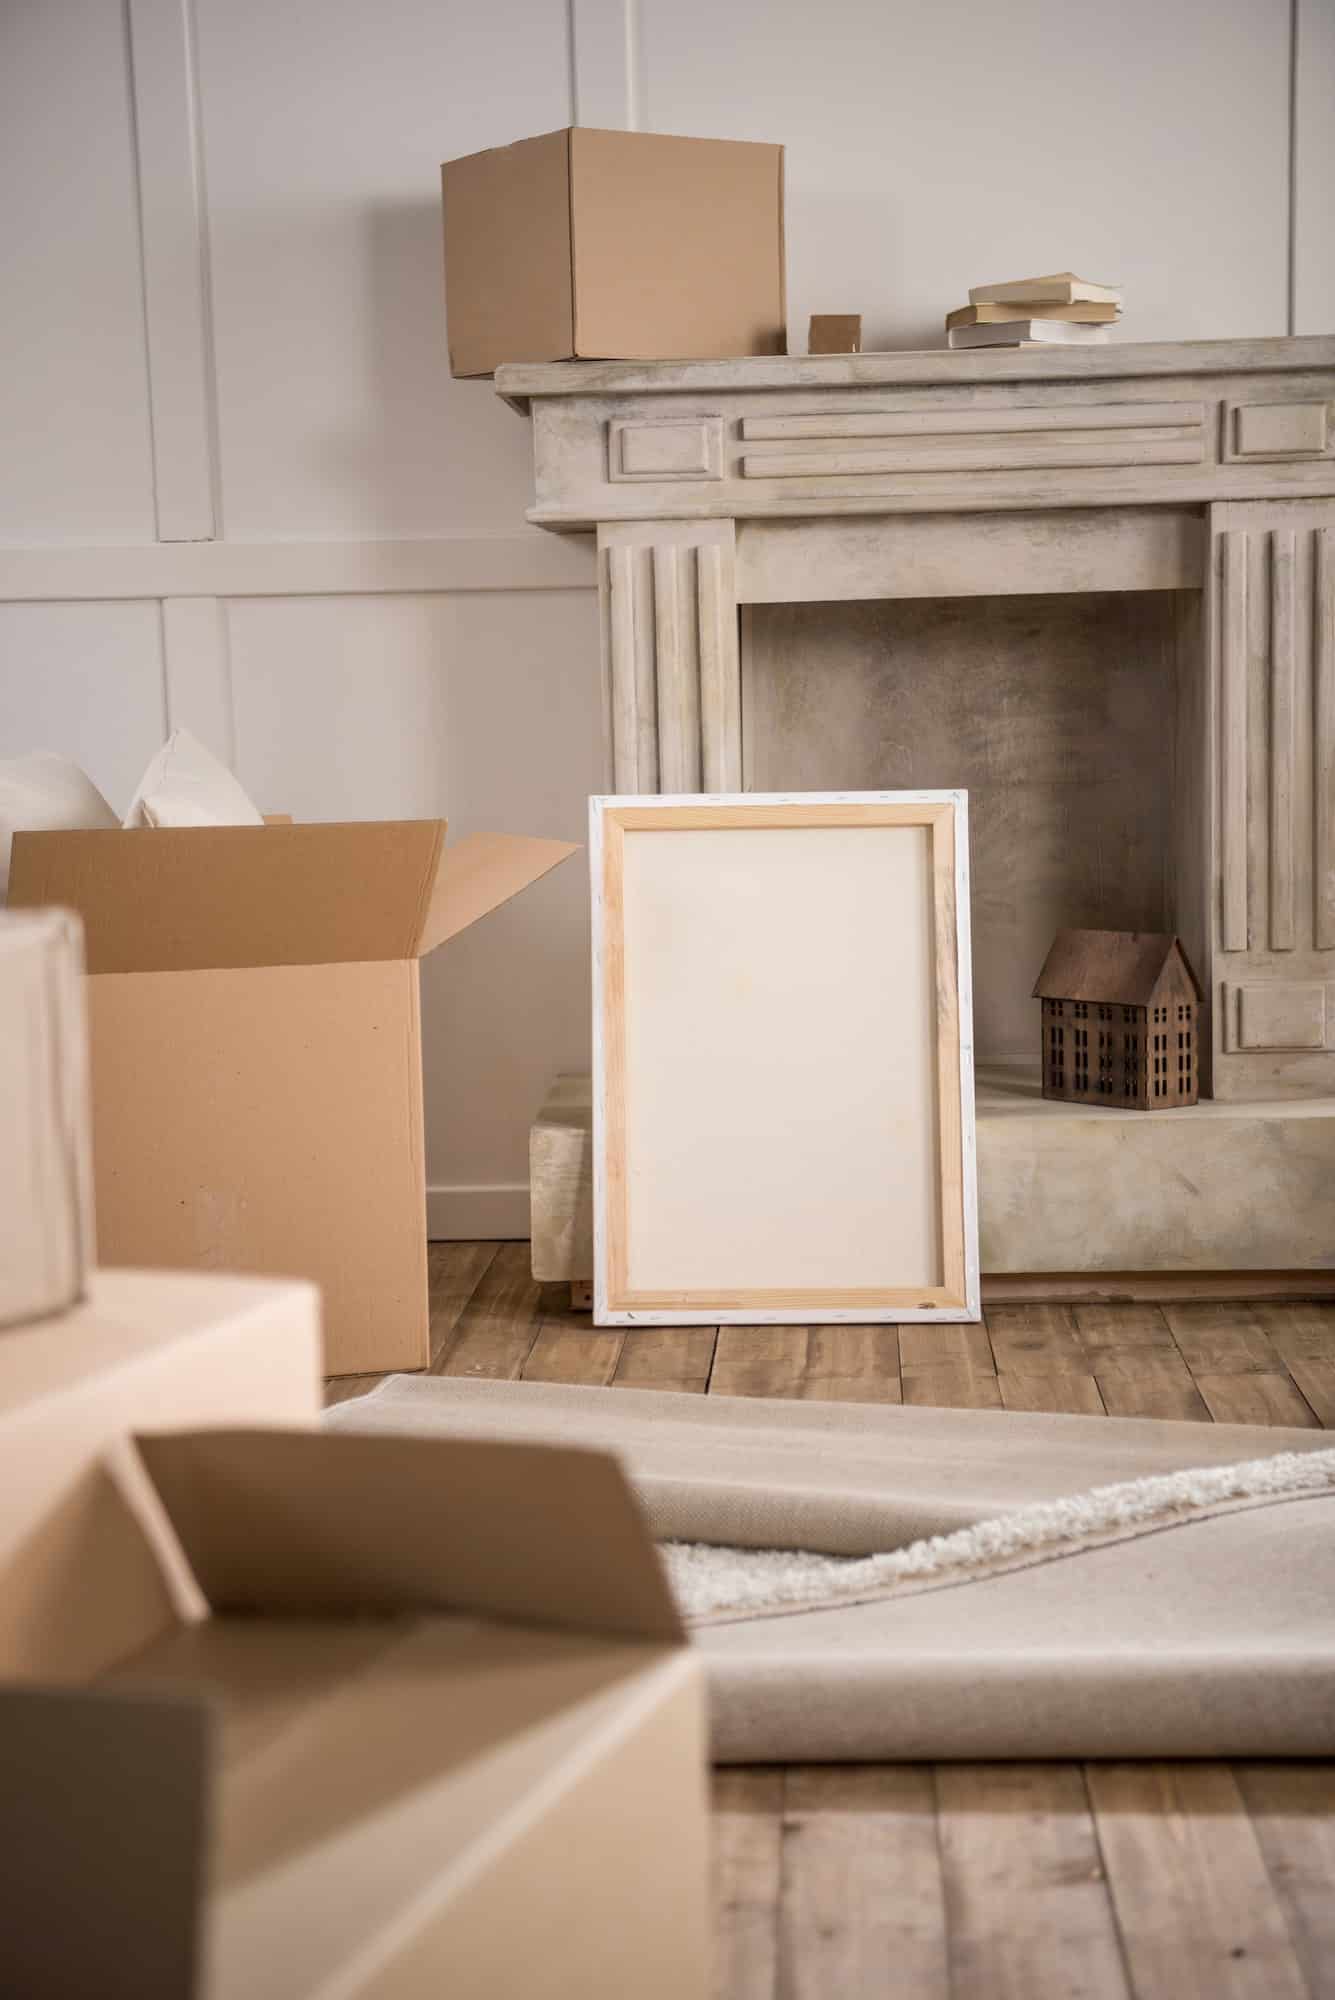 Picture frame and cardboard boxes in empty room, relocation concept